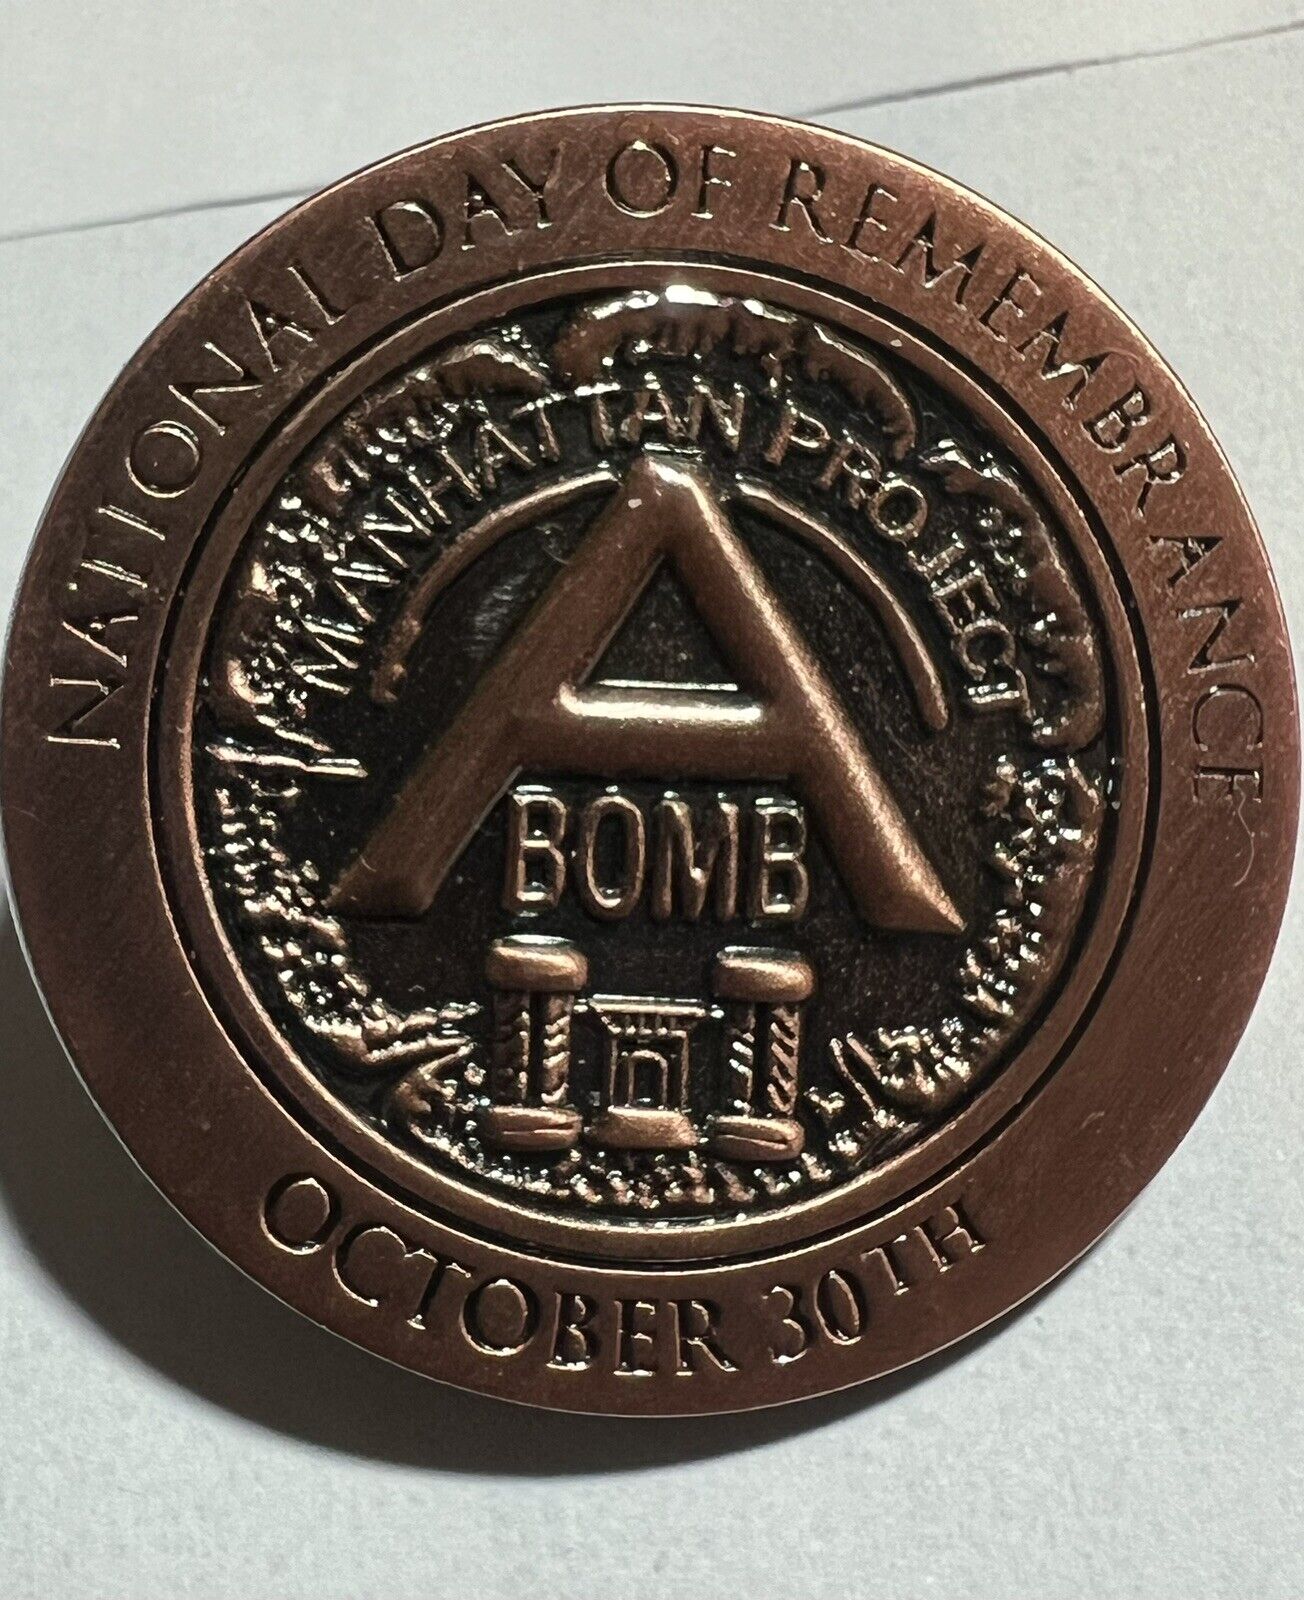 Manhattan Project A Bomb National Day of Remembrance Pin October 30, 2009